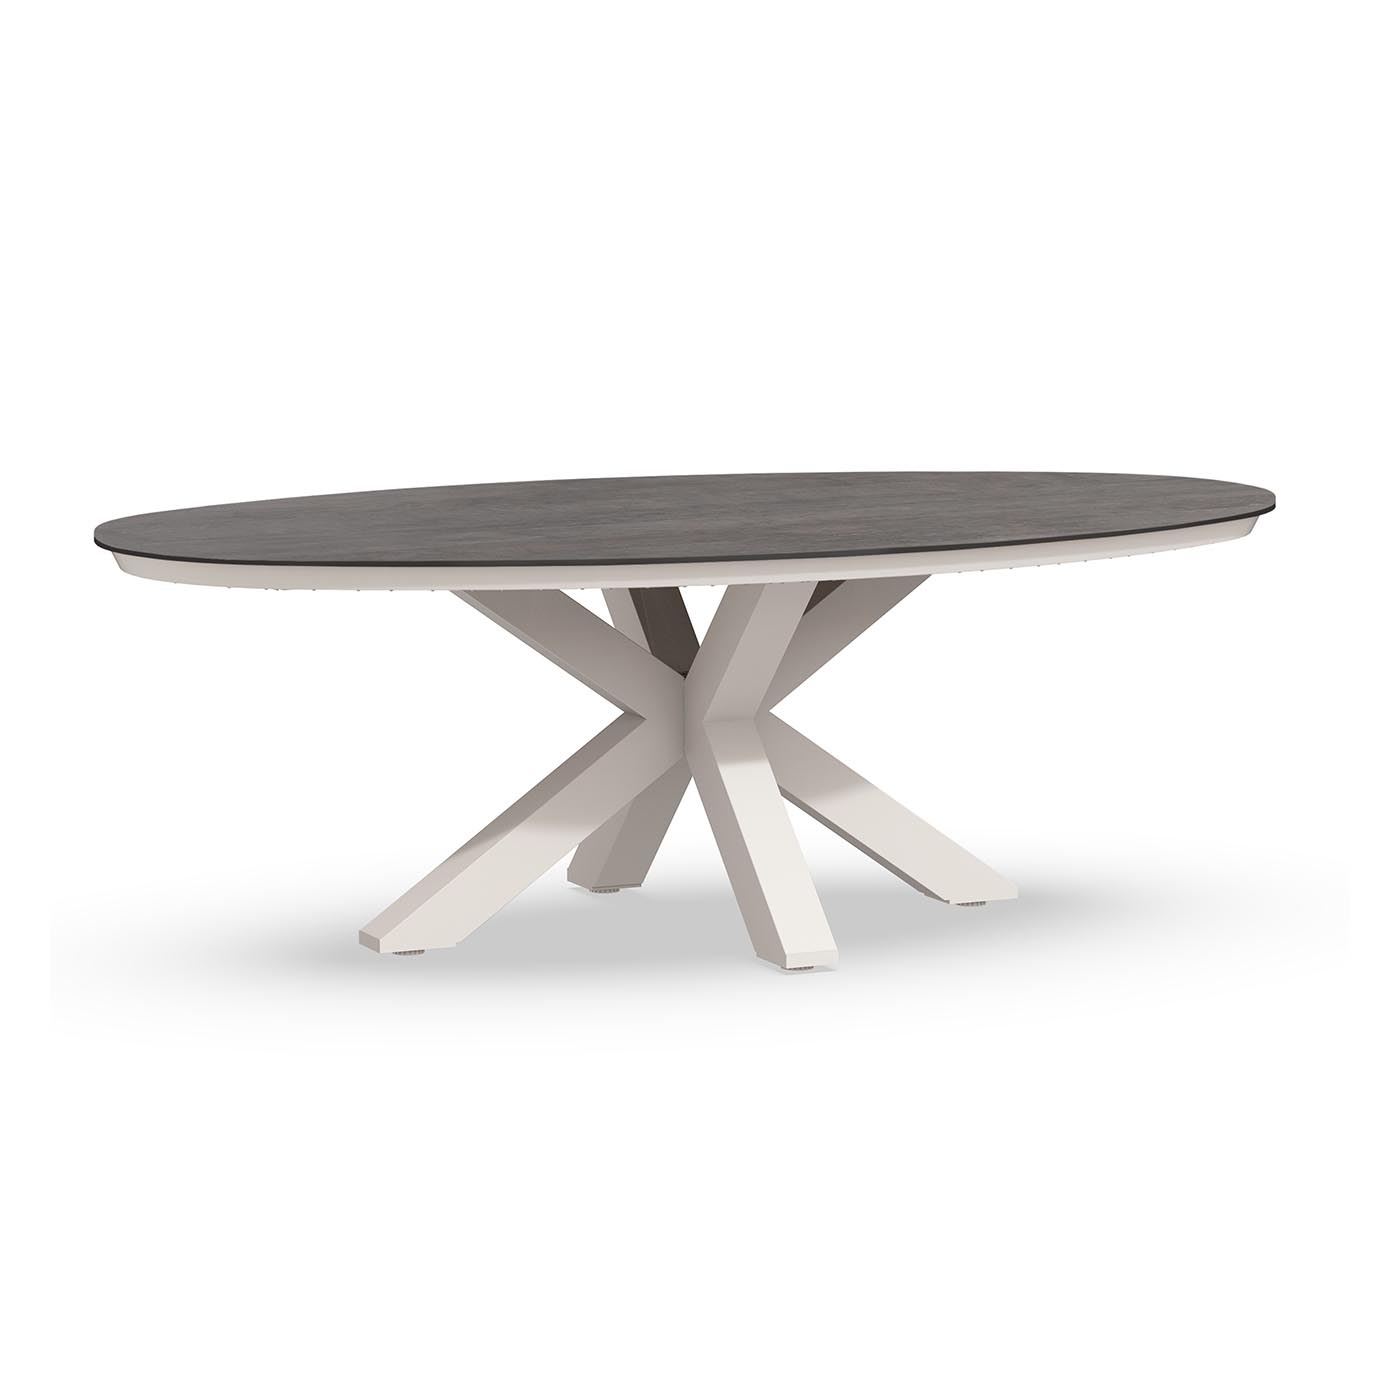 Oblong Dining Table Trespa Forest Grey 220 x 130 cm Creme White